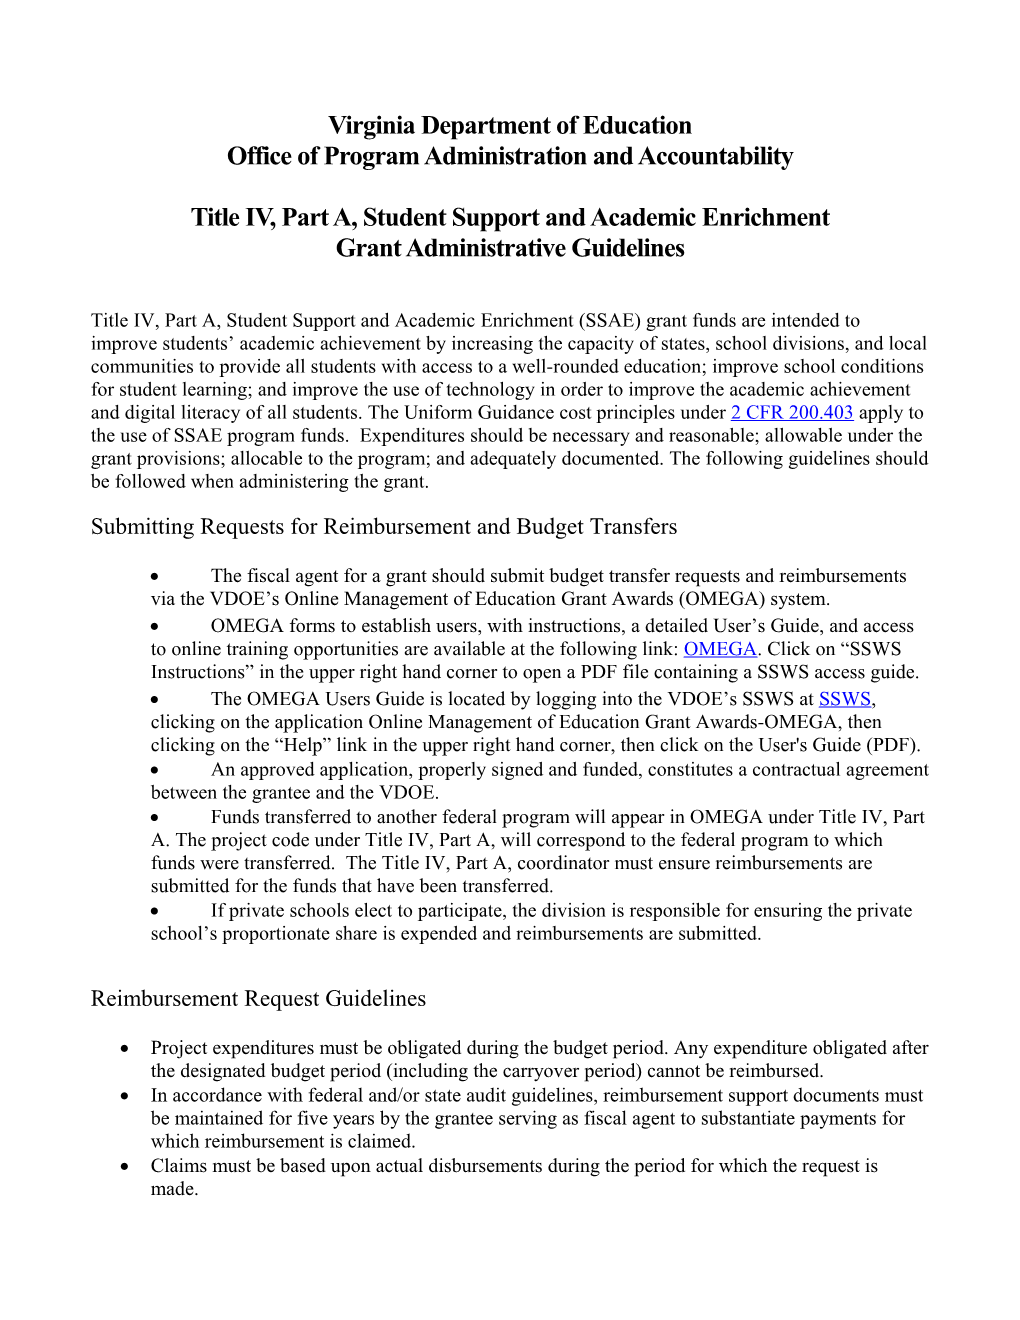 Title IV, Part A, Student Support and Academic Enrichment Administrative Guidelines